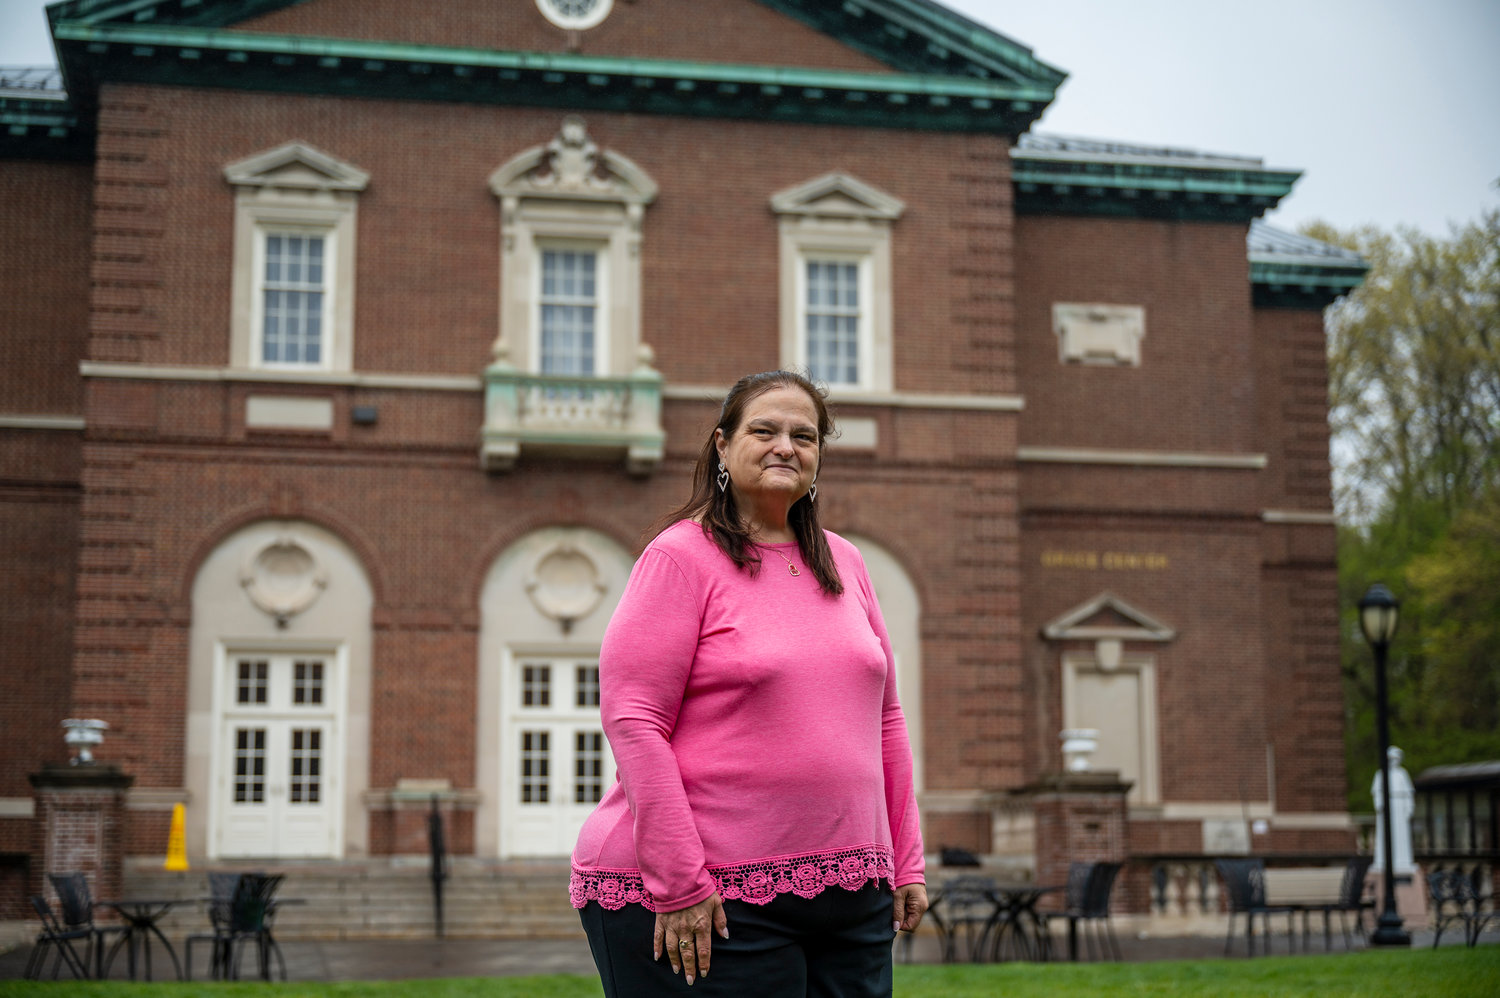 Director for the Divisions of natural science Pamela Kerrigan joined the College of Mount Saint Vincent 28 years ago. Growing up in the south, she decided to put herself through school to gain an education — and she was the first in her family to achieve this.